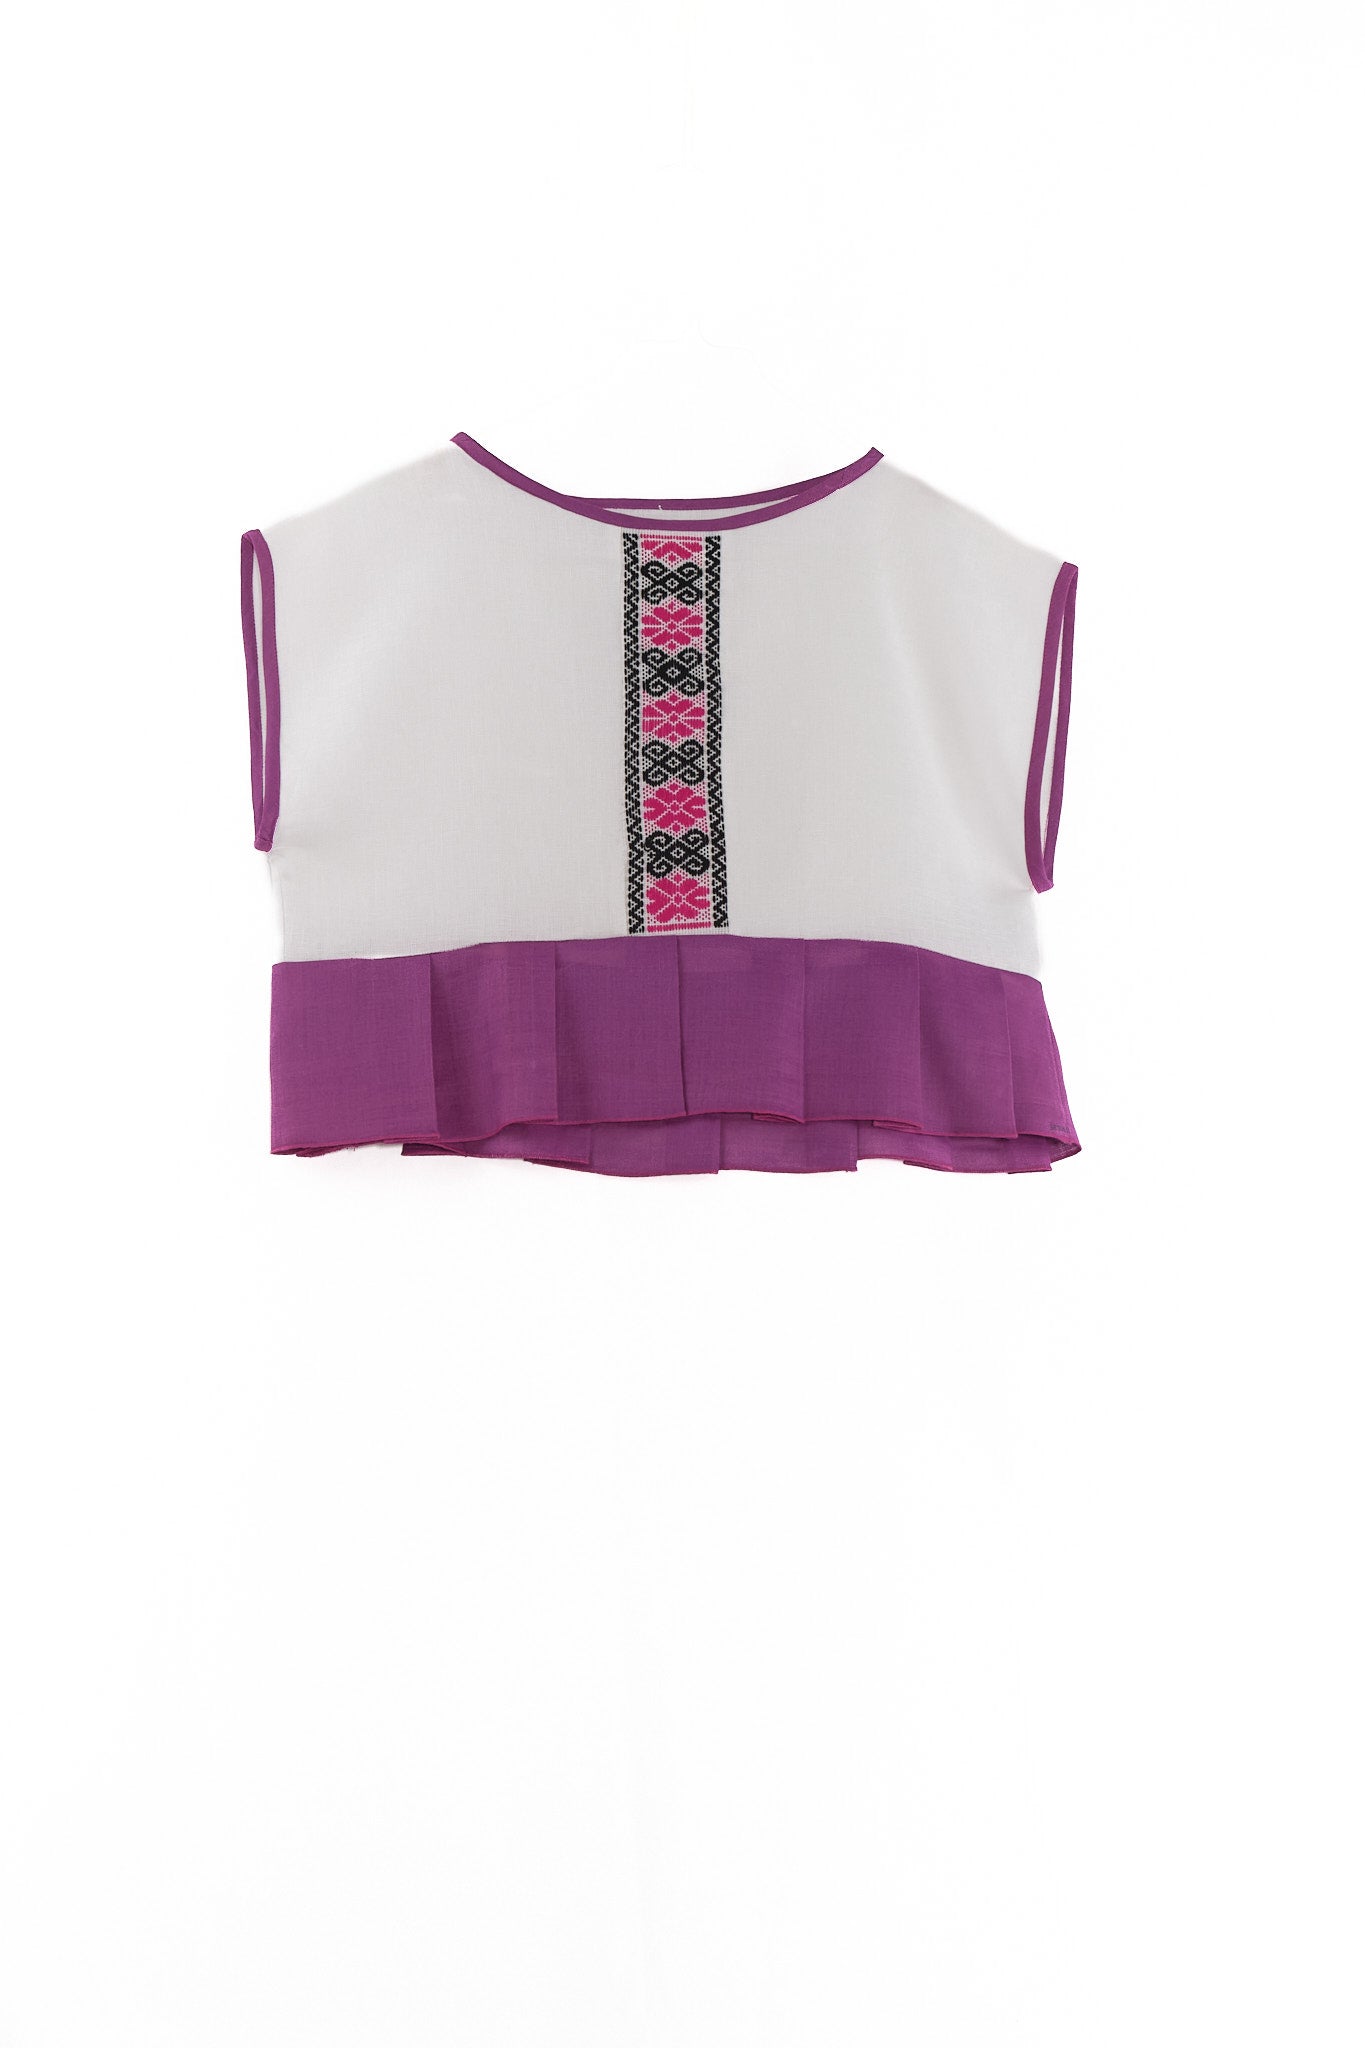 Lourdes crop top blouse white with purple embroidery garment